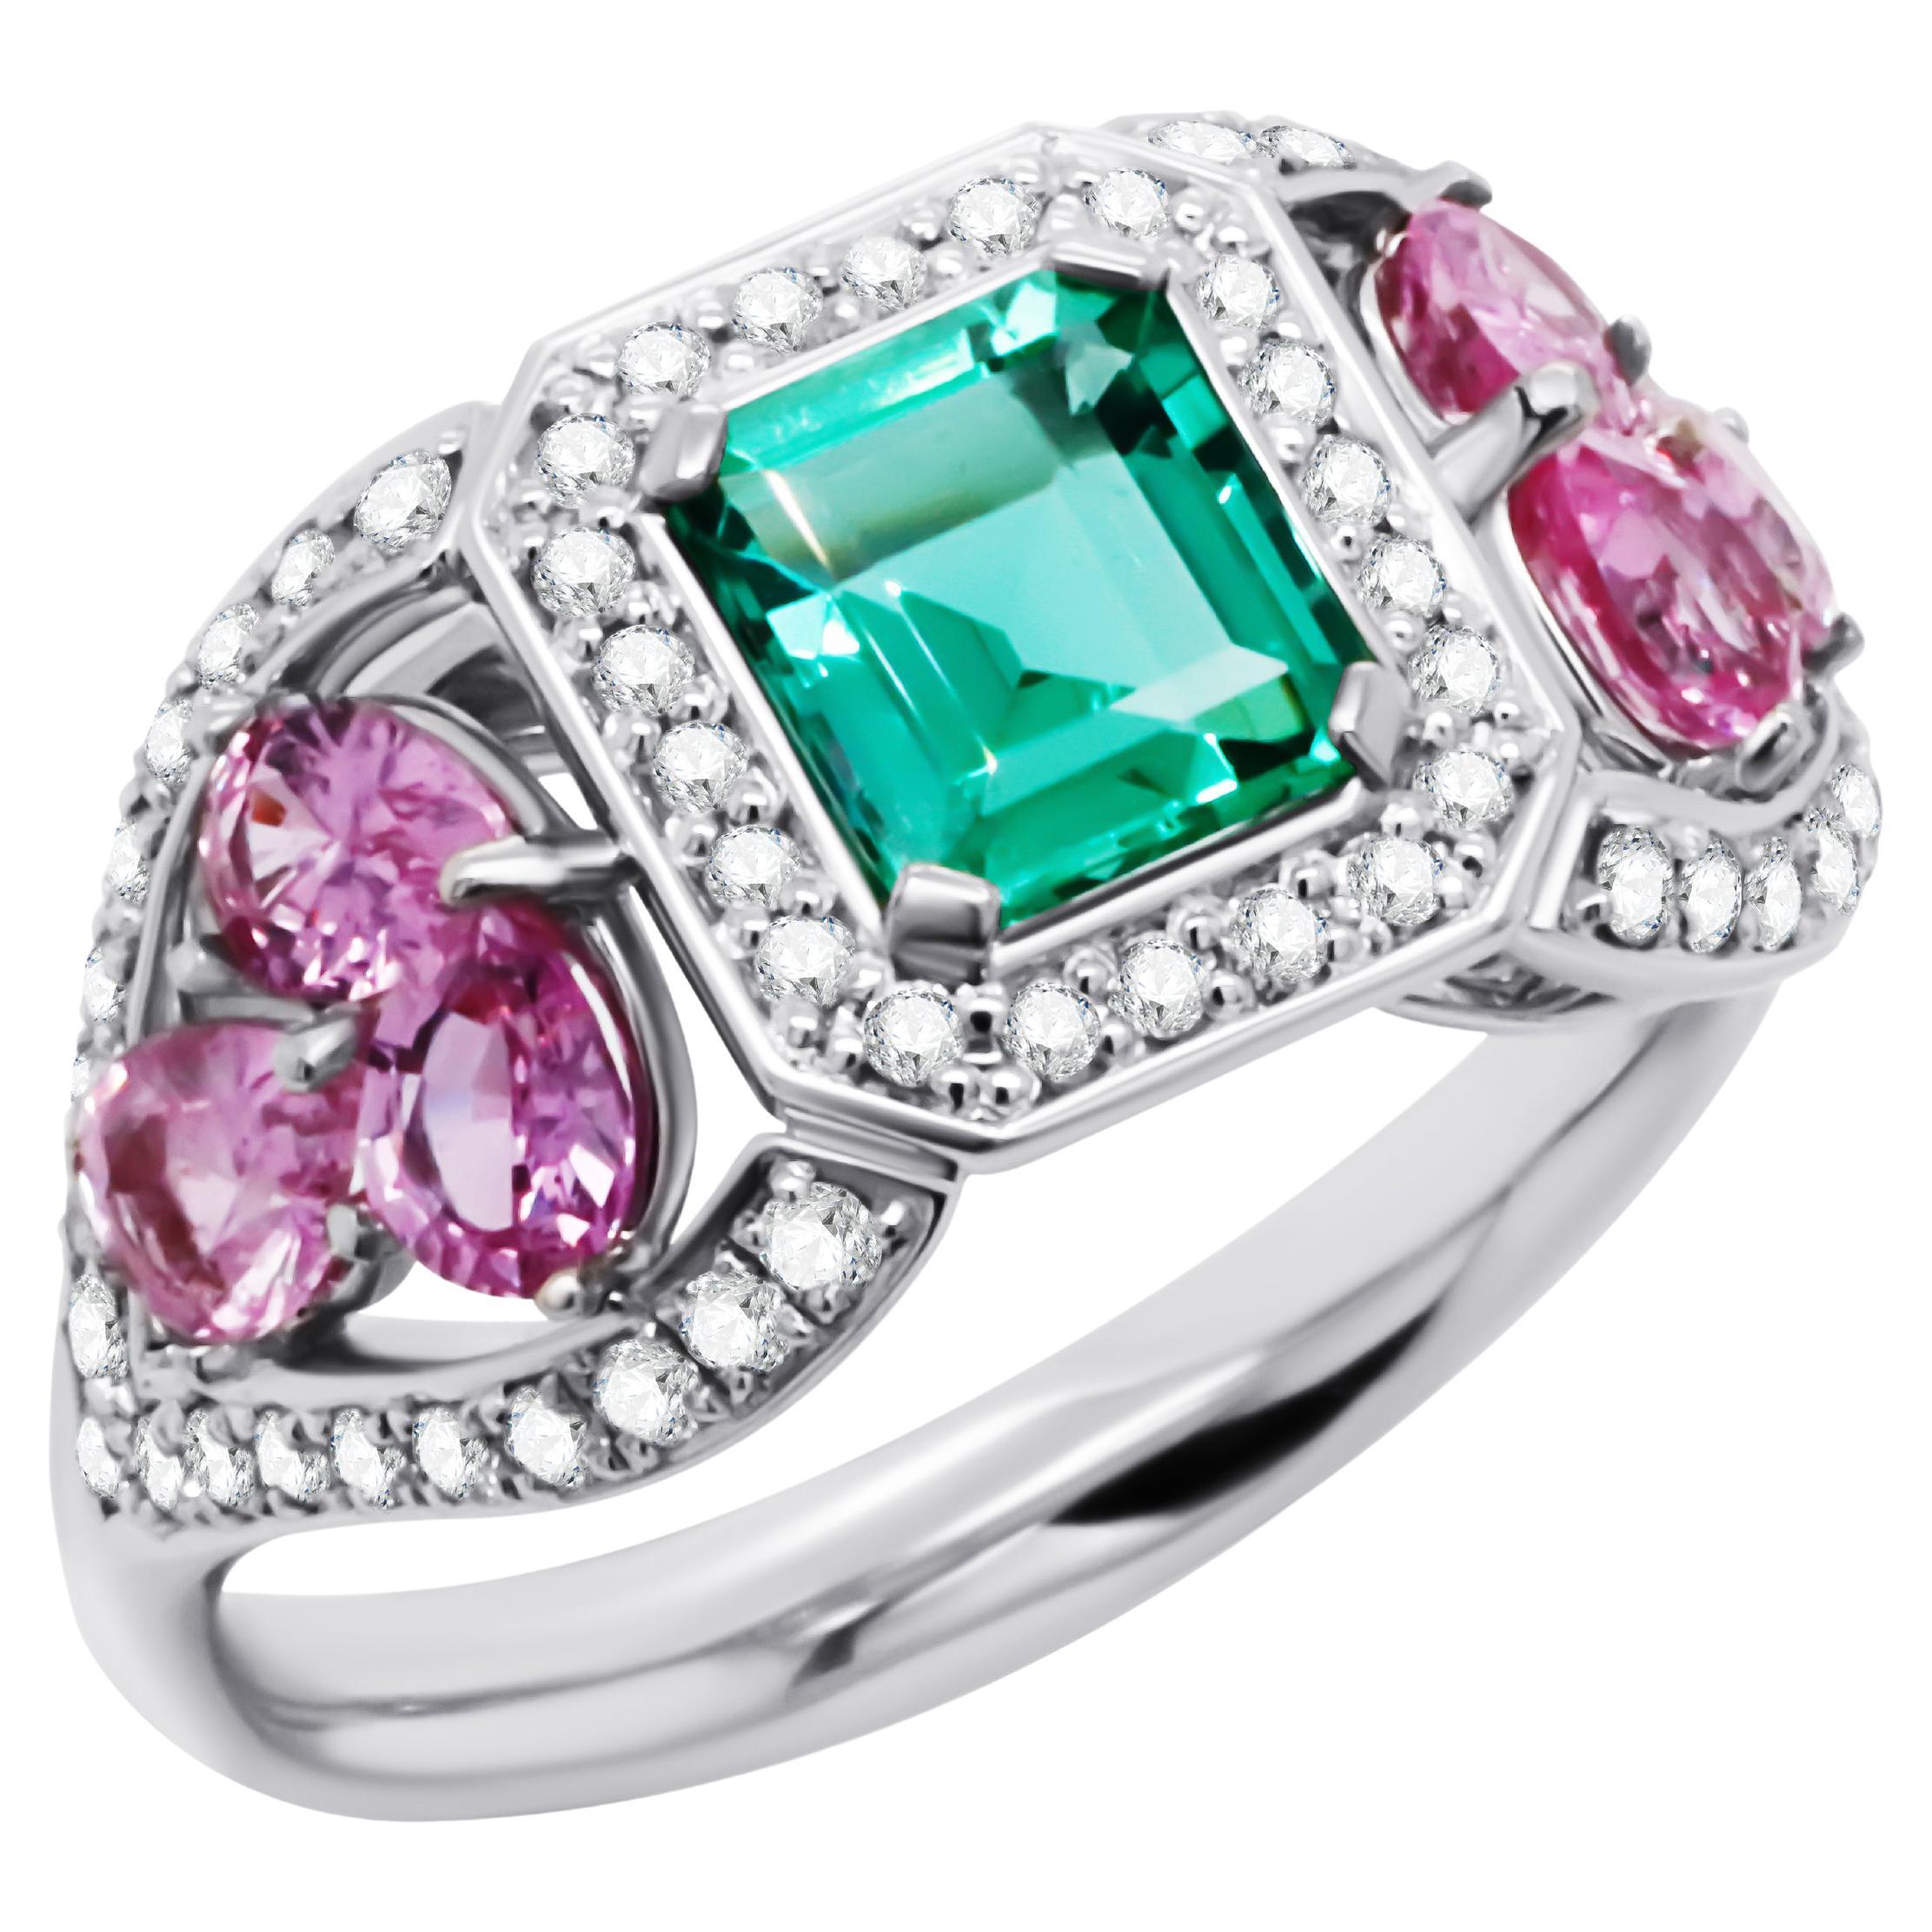 Russian Emerald and Pink Sapphires 18K Gold Diamonds Ring